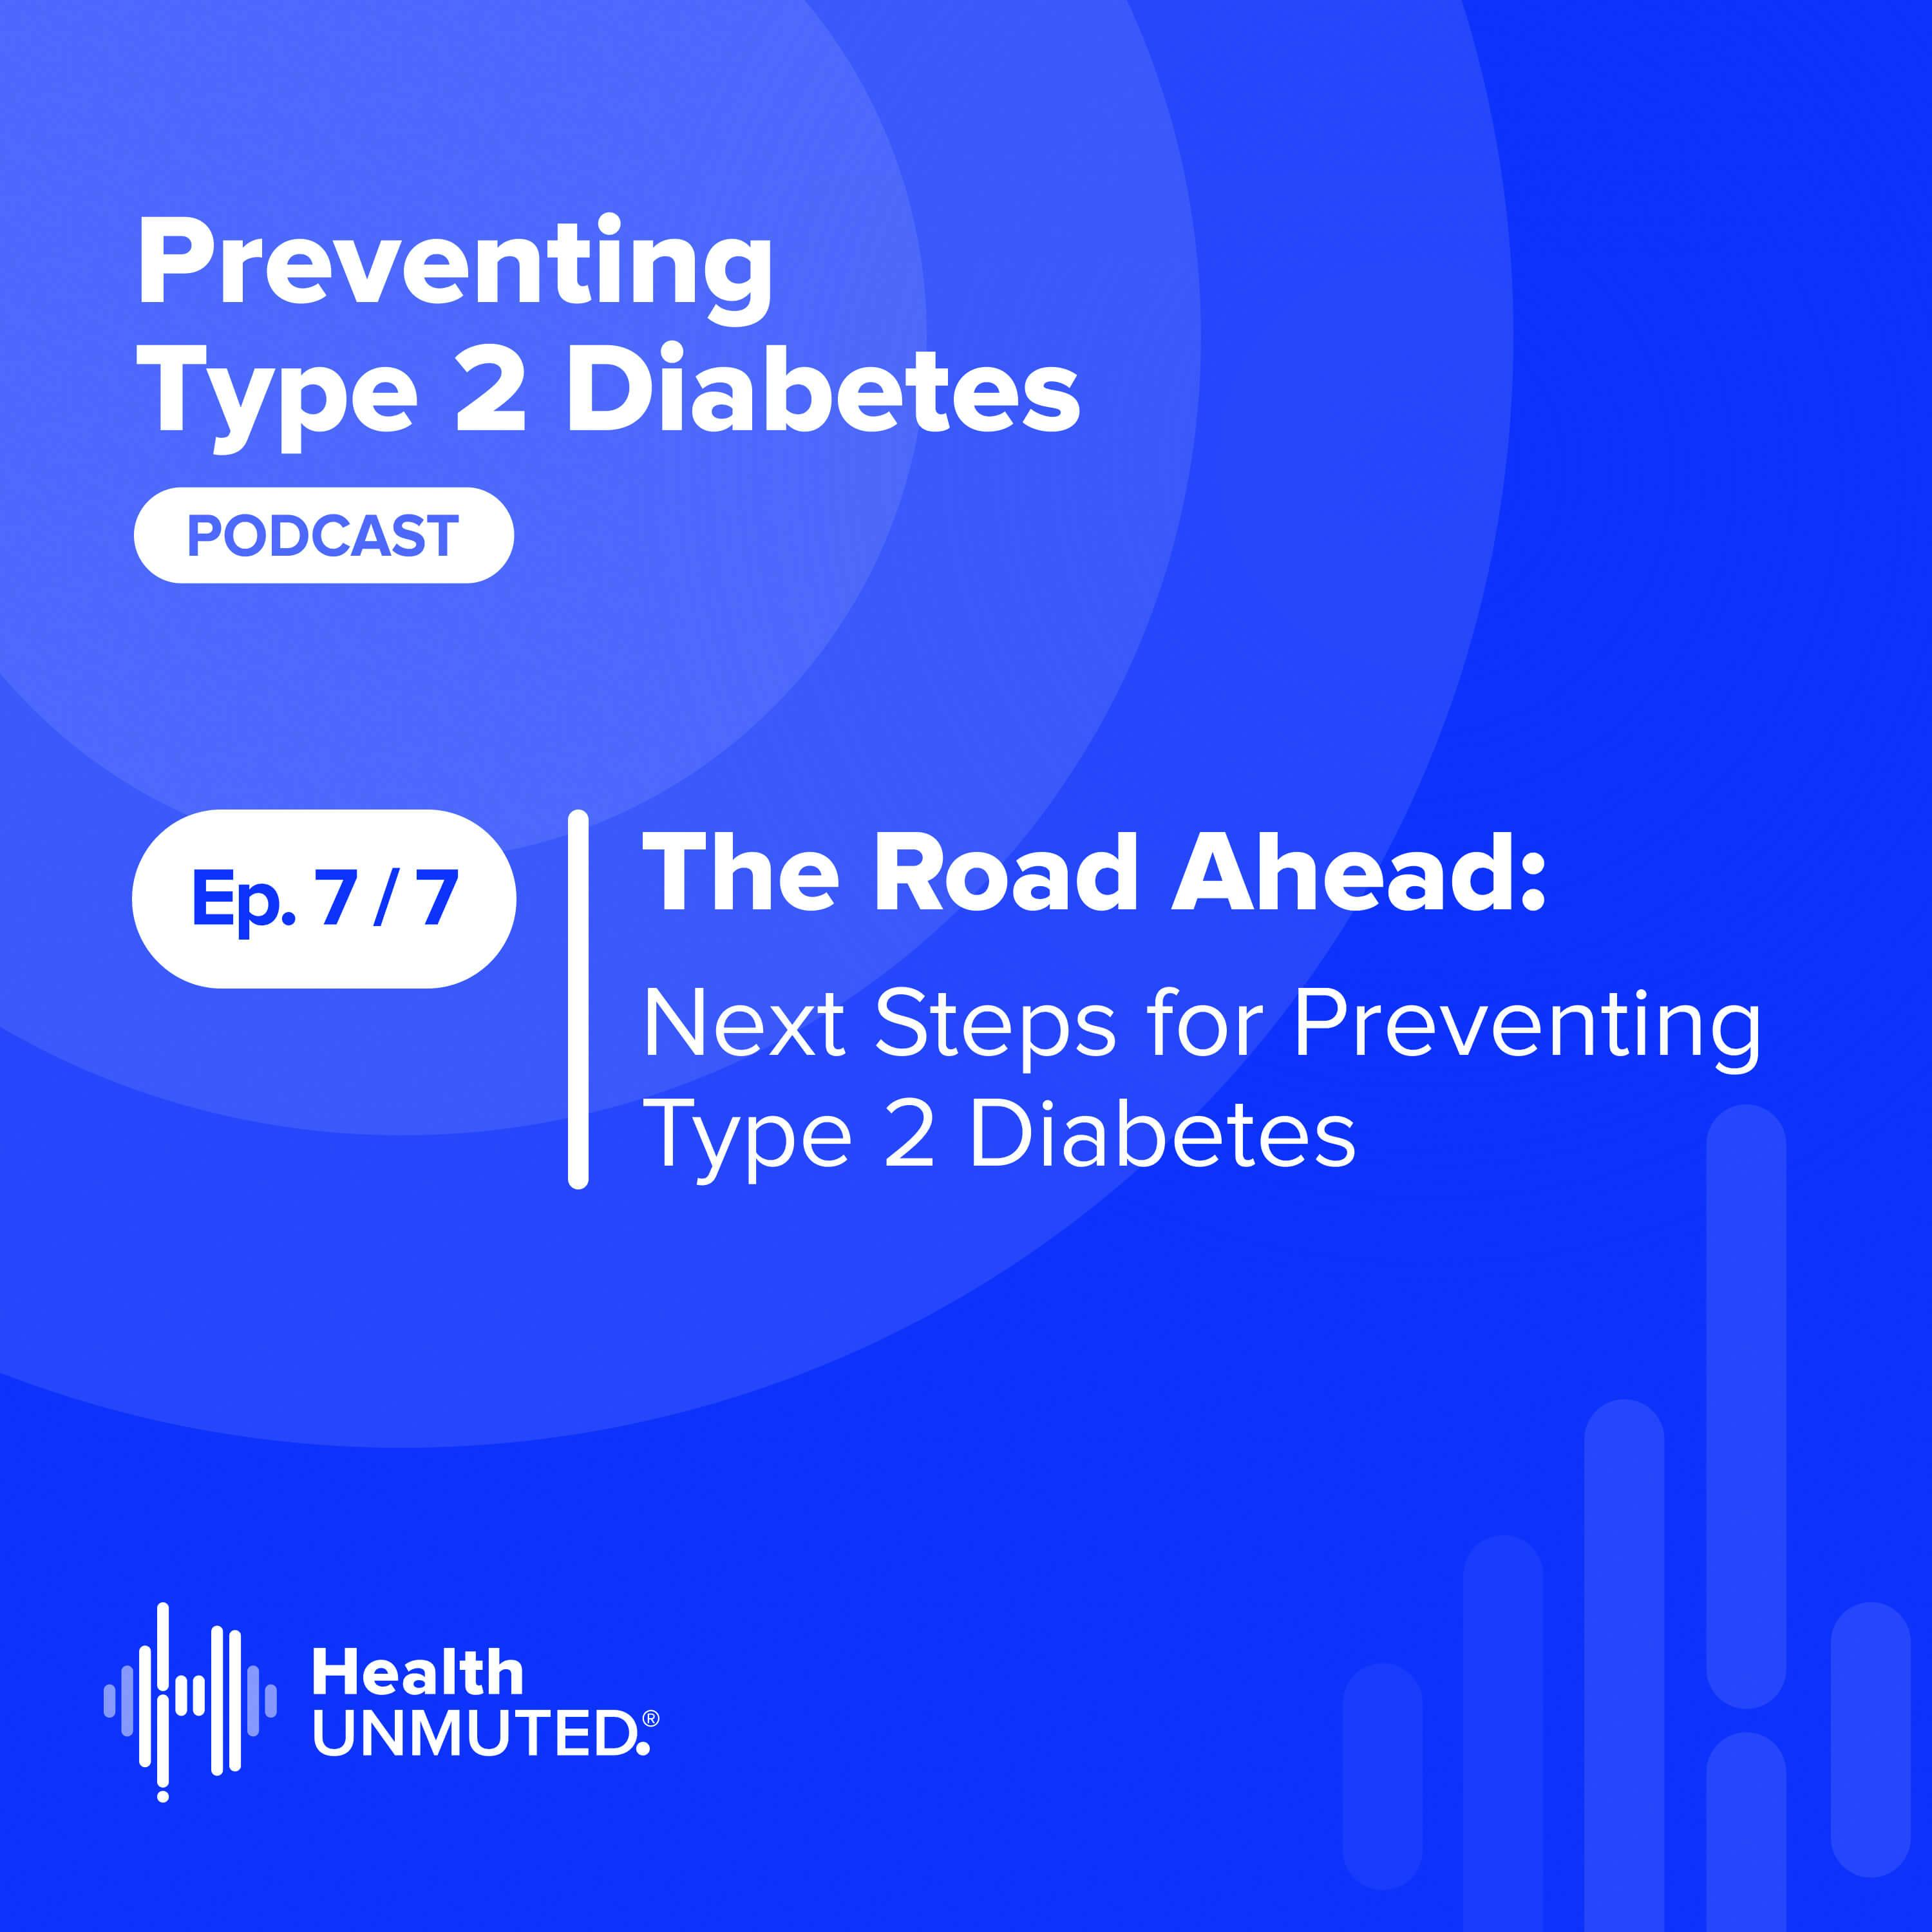 Ep 7: The Road Ahead: Next Steps for Preventing Type 2 Diabetes